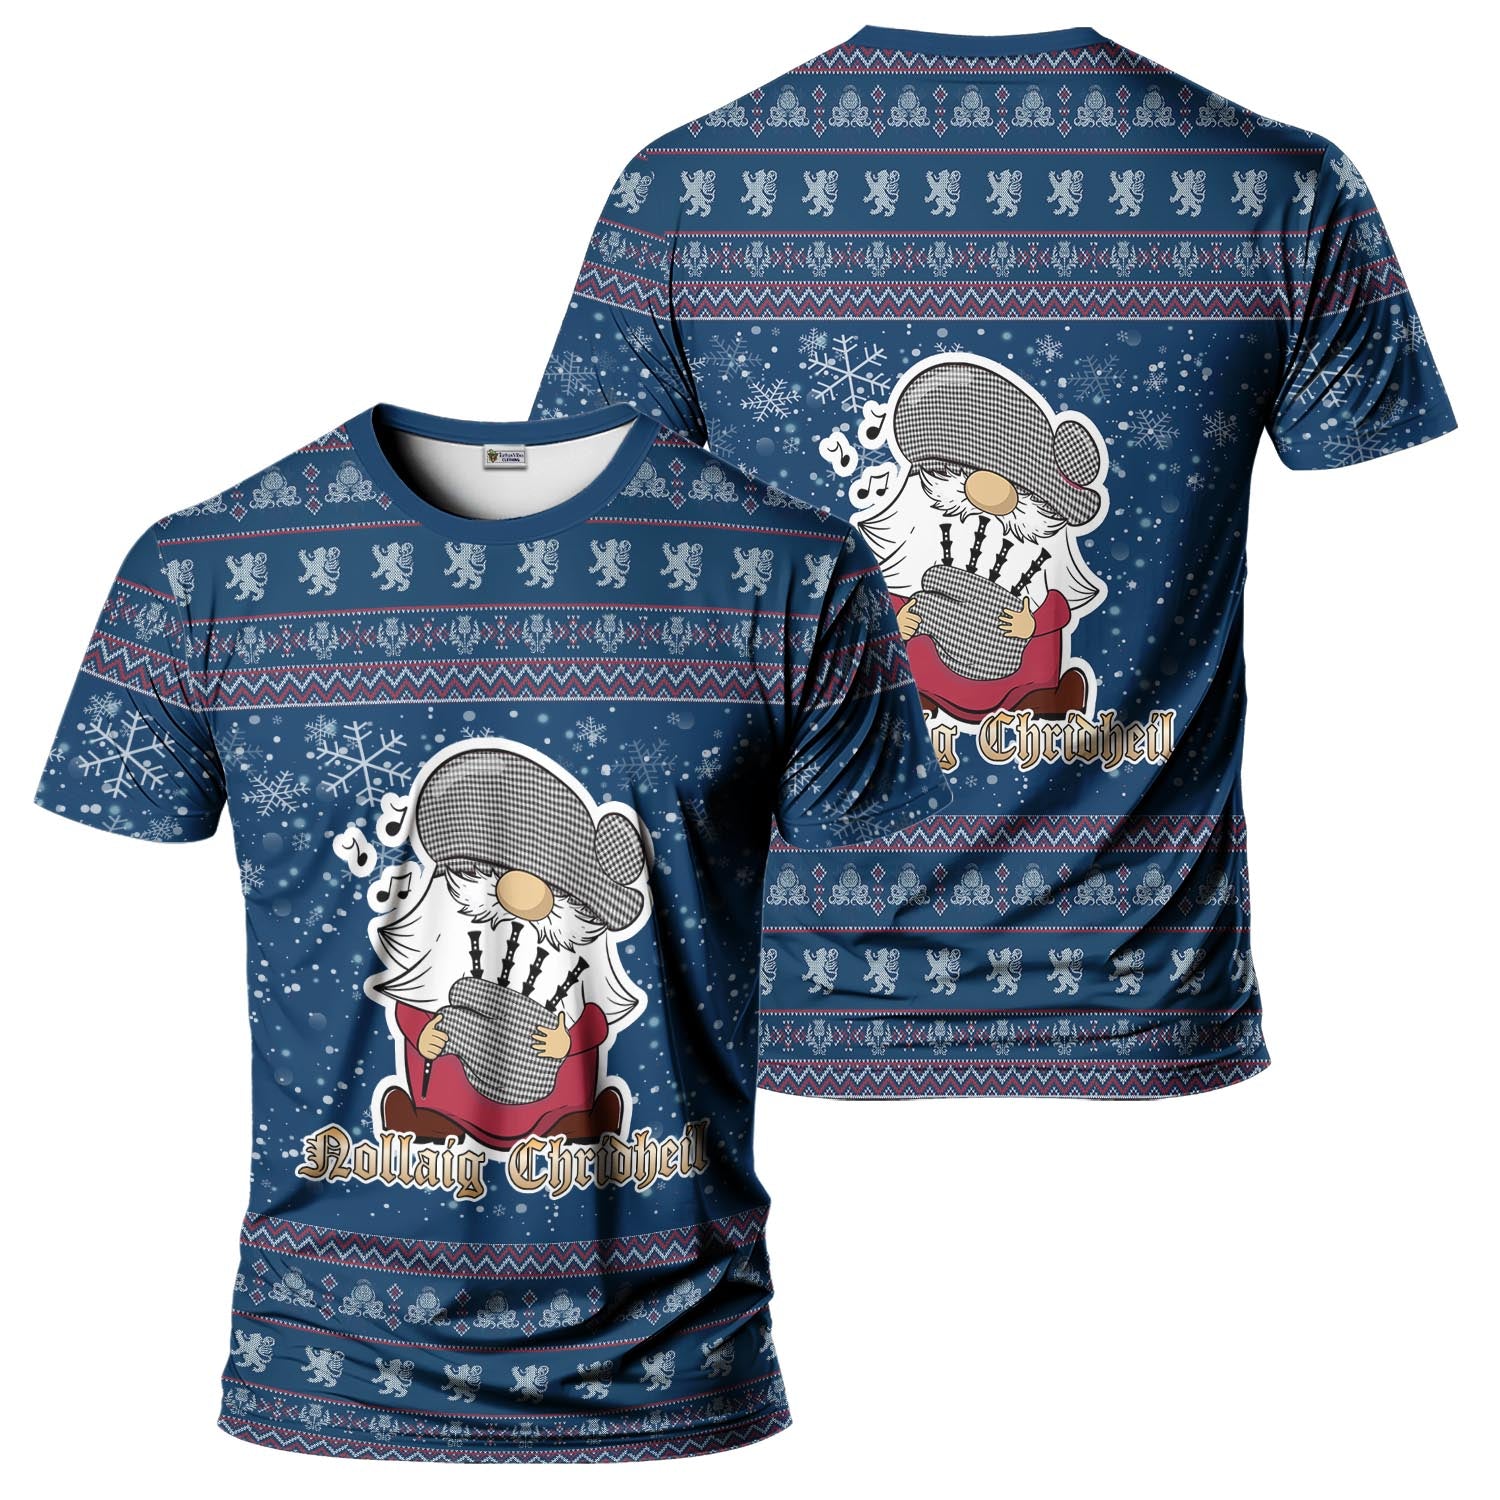 Shepherd Clan Christmas Family T-Shirt with Funny Gnome Playing Bagpipes Kid's Shirt Blue - Tartanvibesclothing